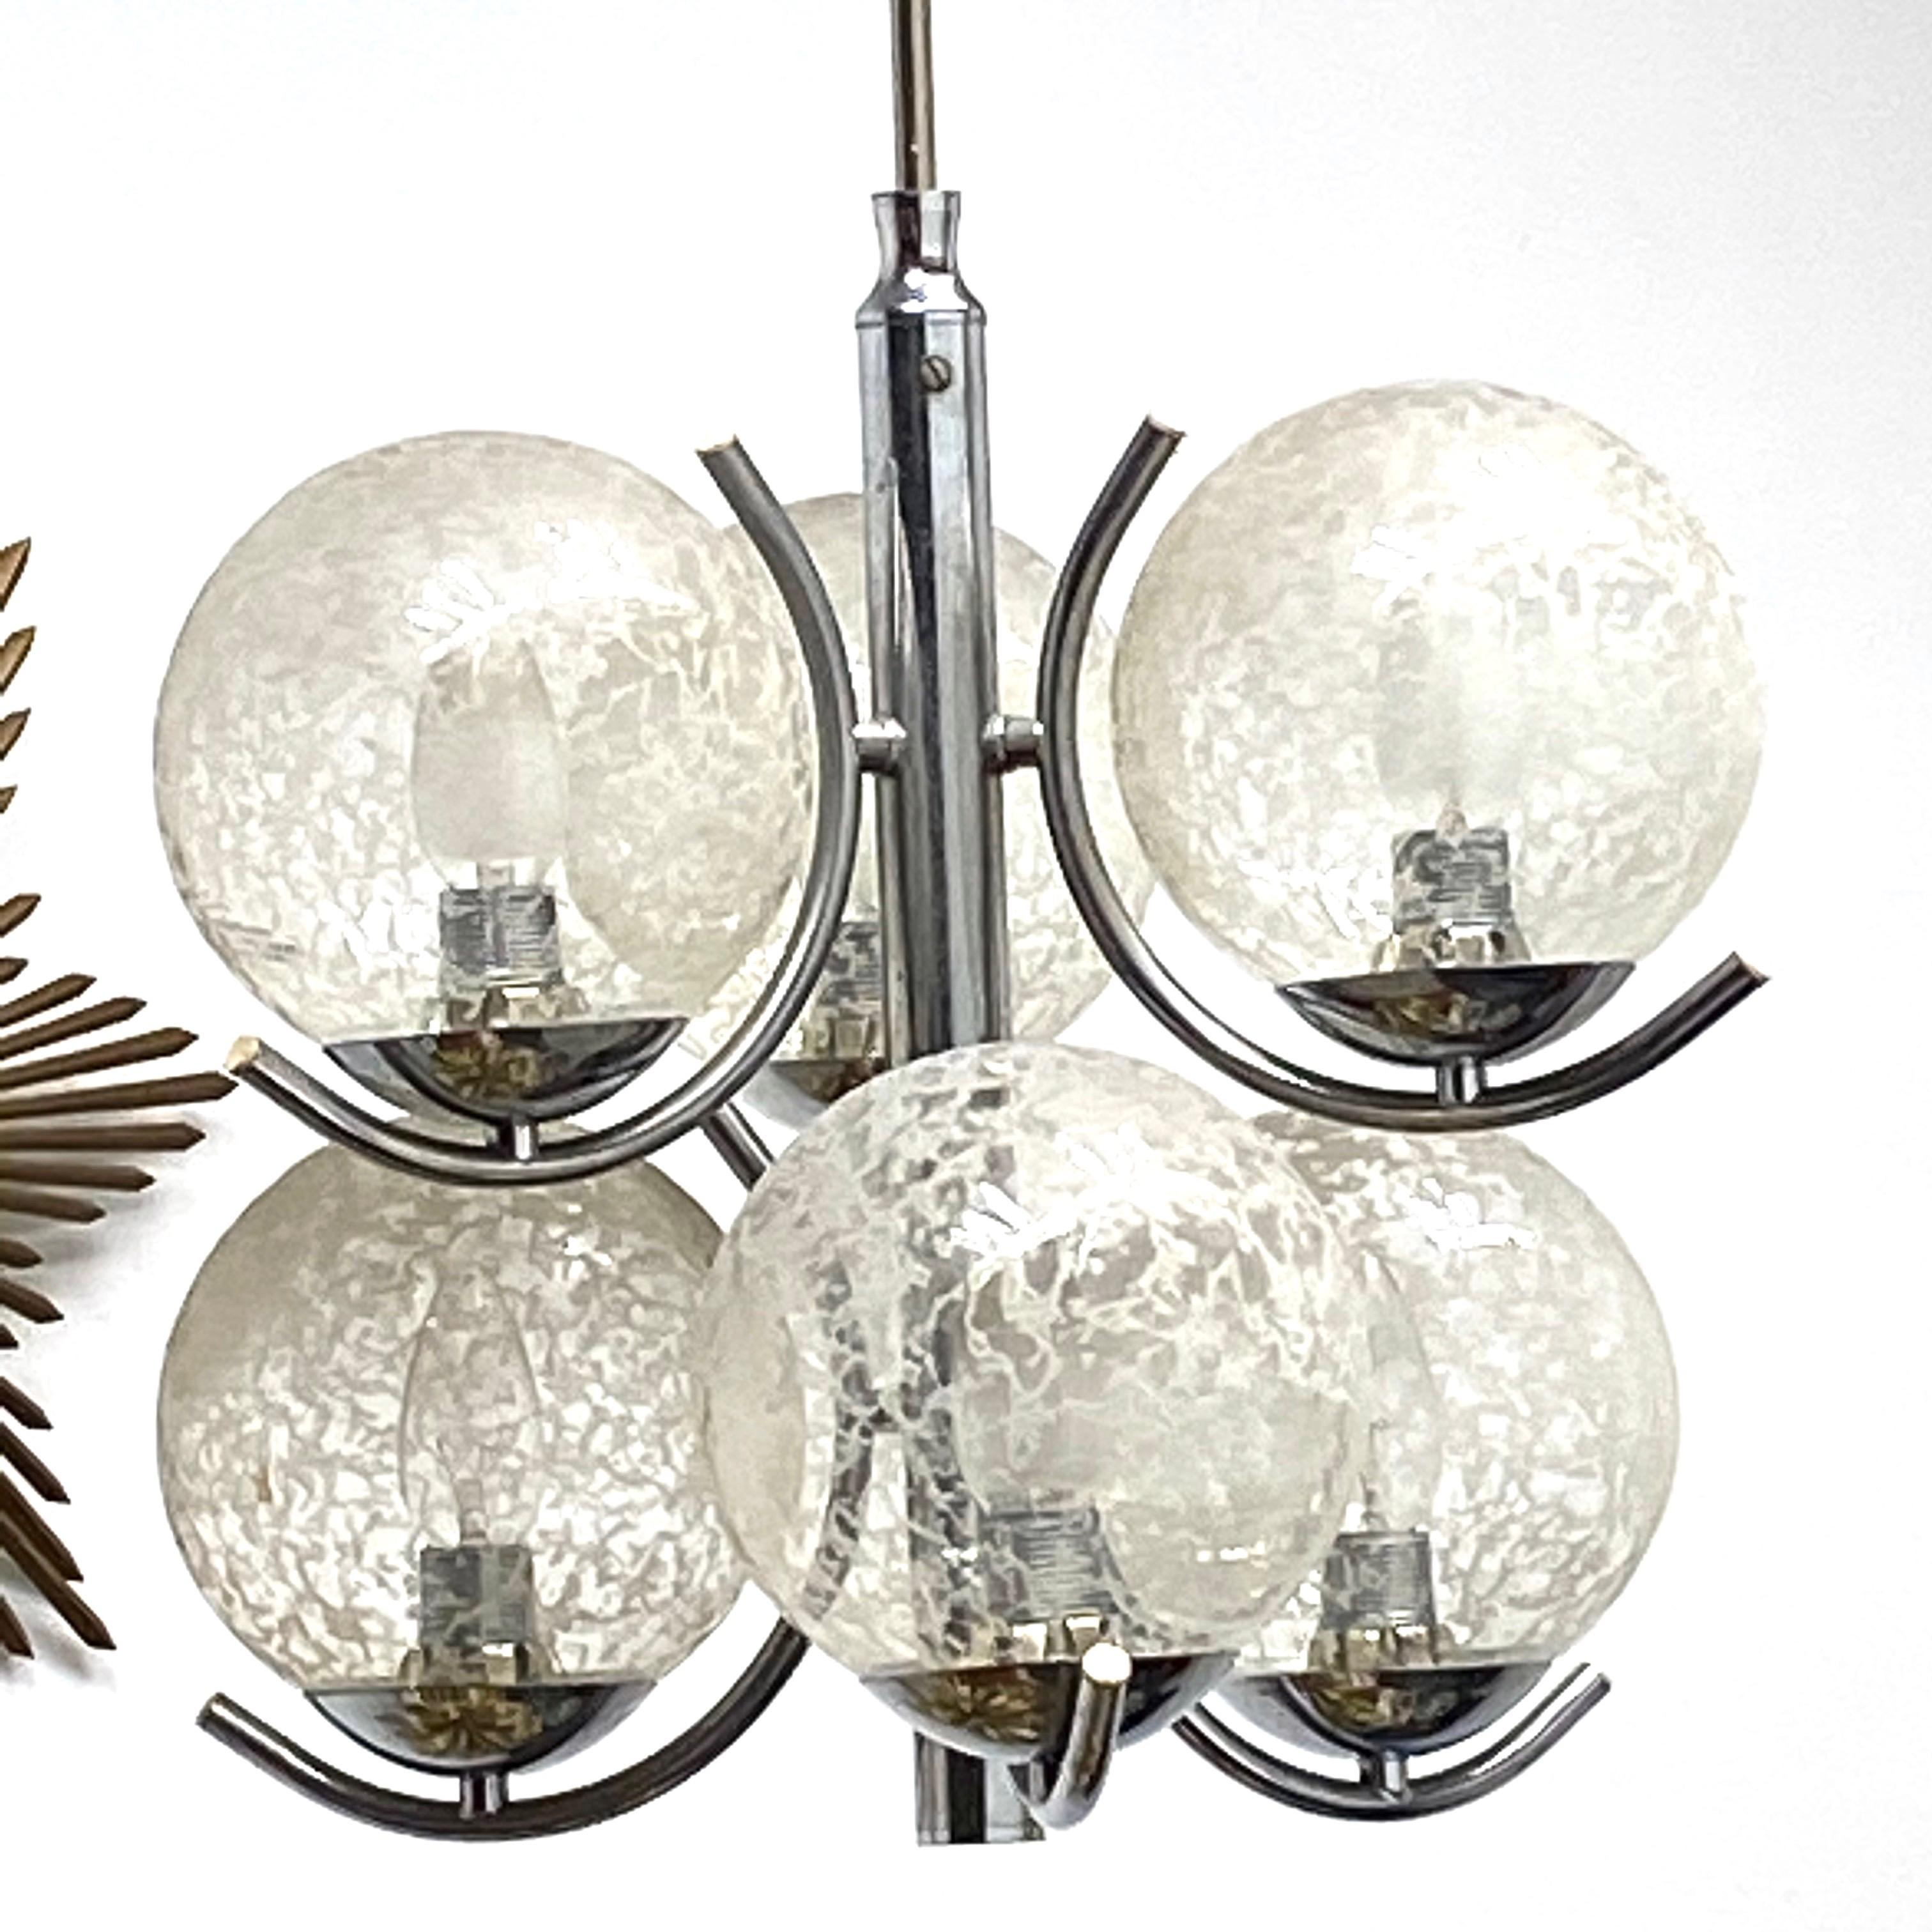 Mid-20th Century 2 Tiered Richard Essig 6-Arm Space Age Chandelier, 1970s, Germany For Sale